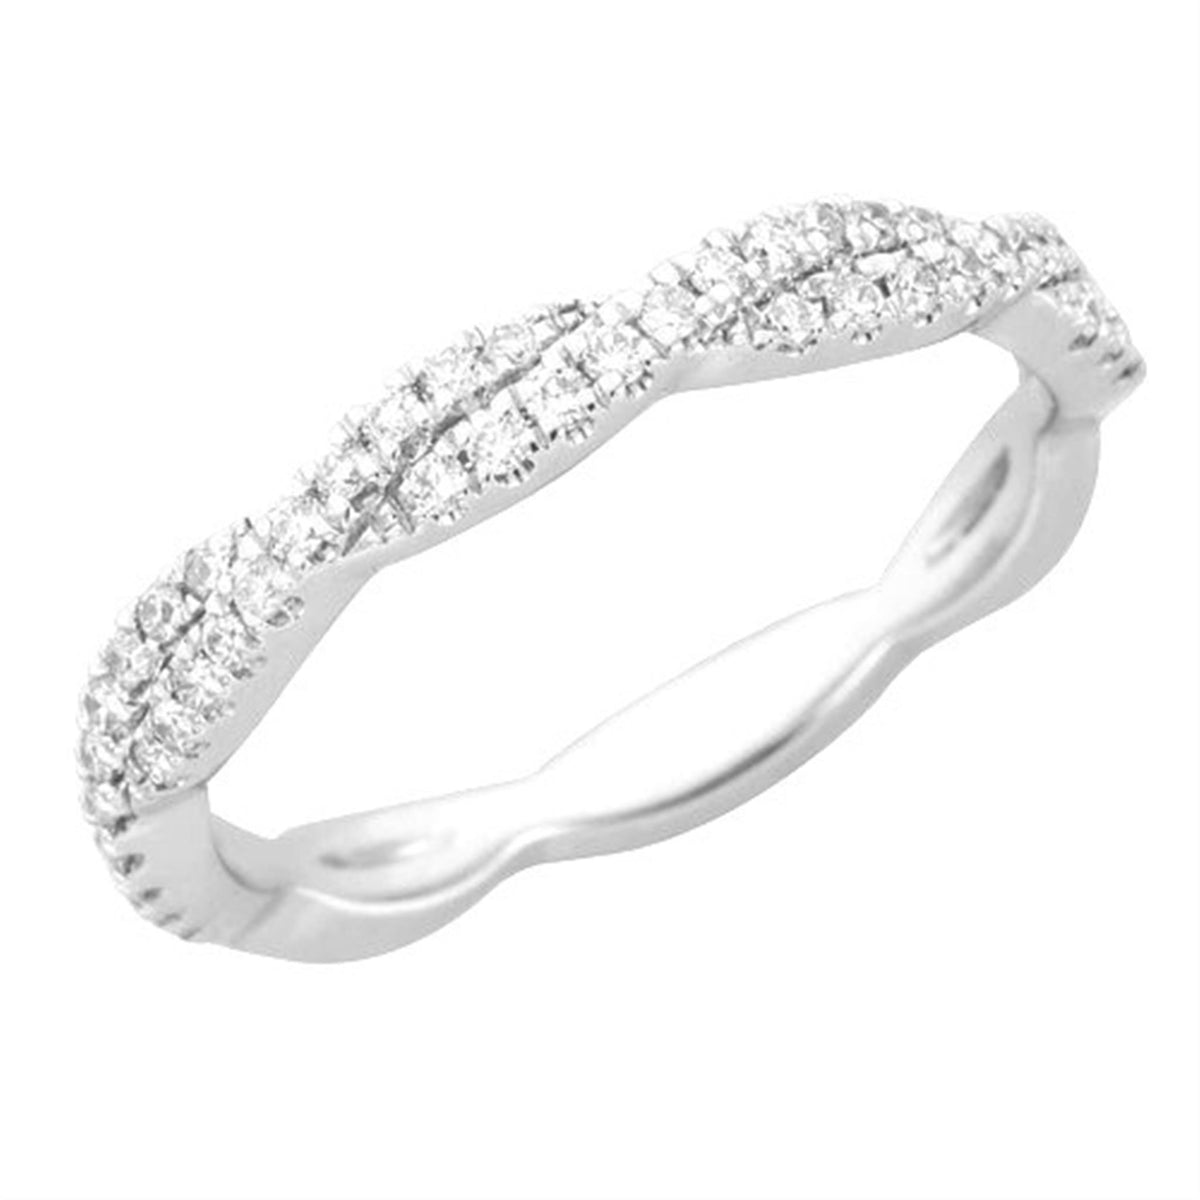 Infinity Twist 18Kt White Gold Ring With 0.27cttw Natural Diamonds